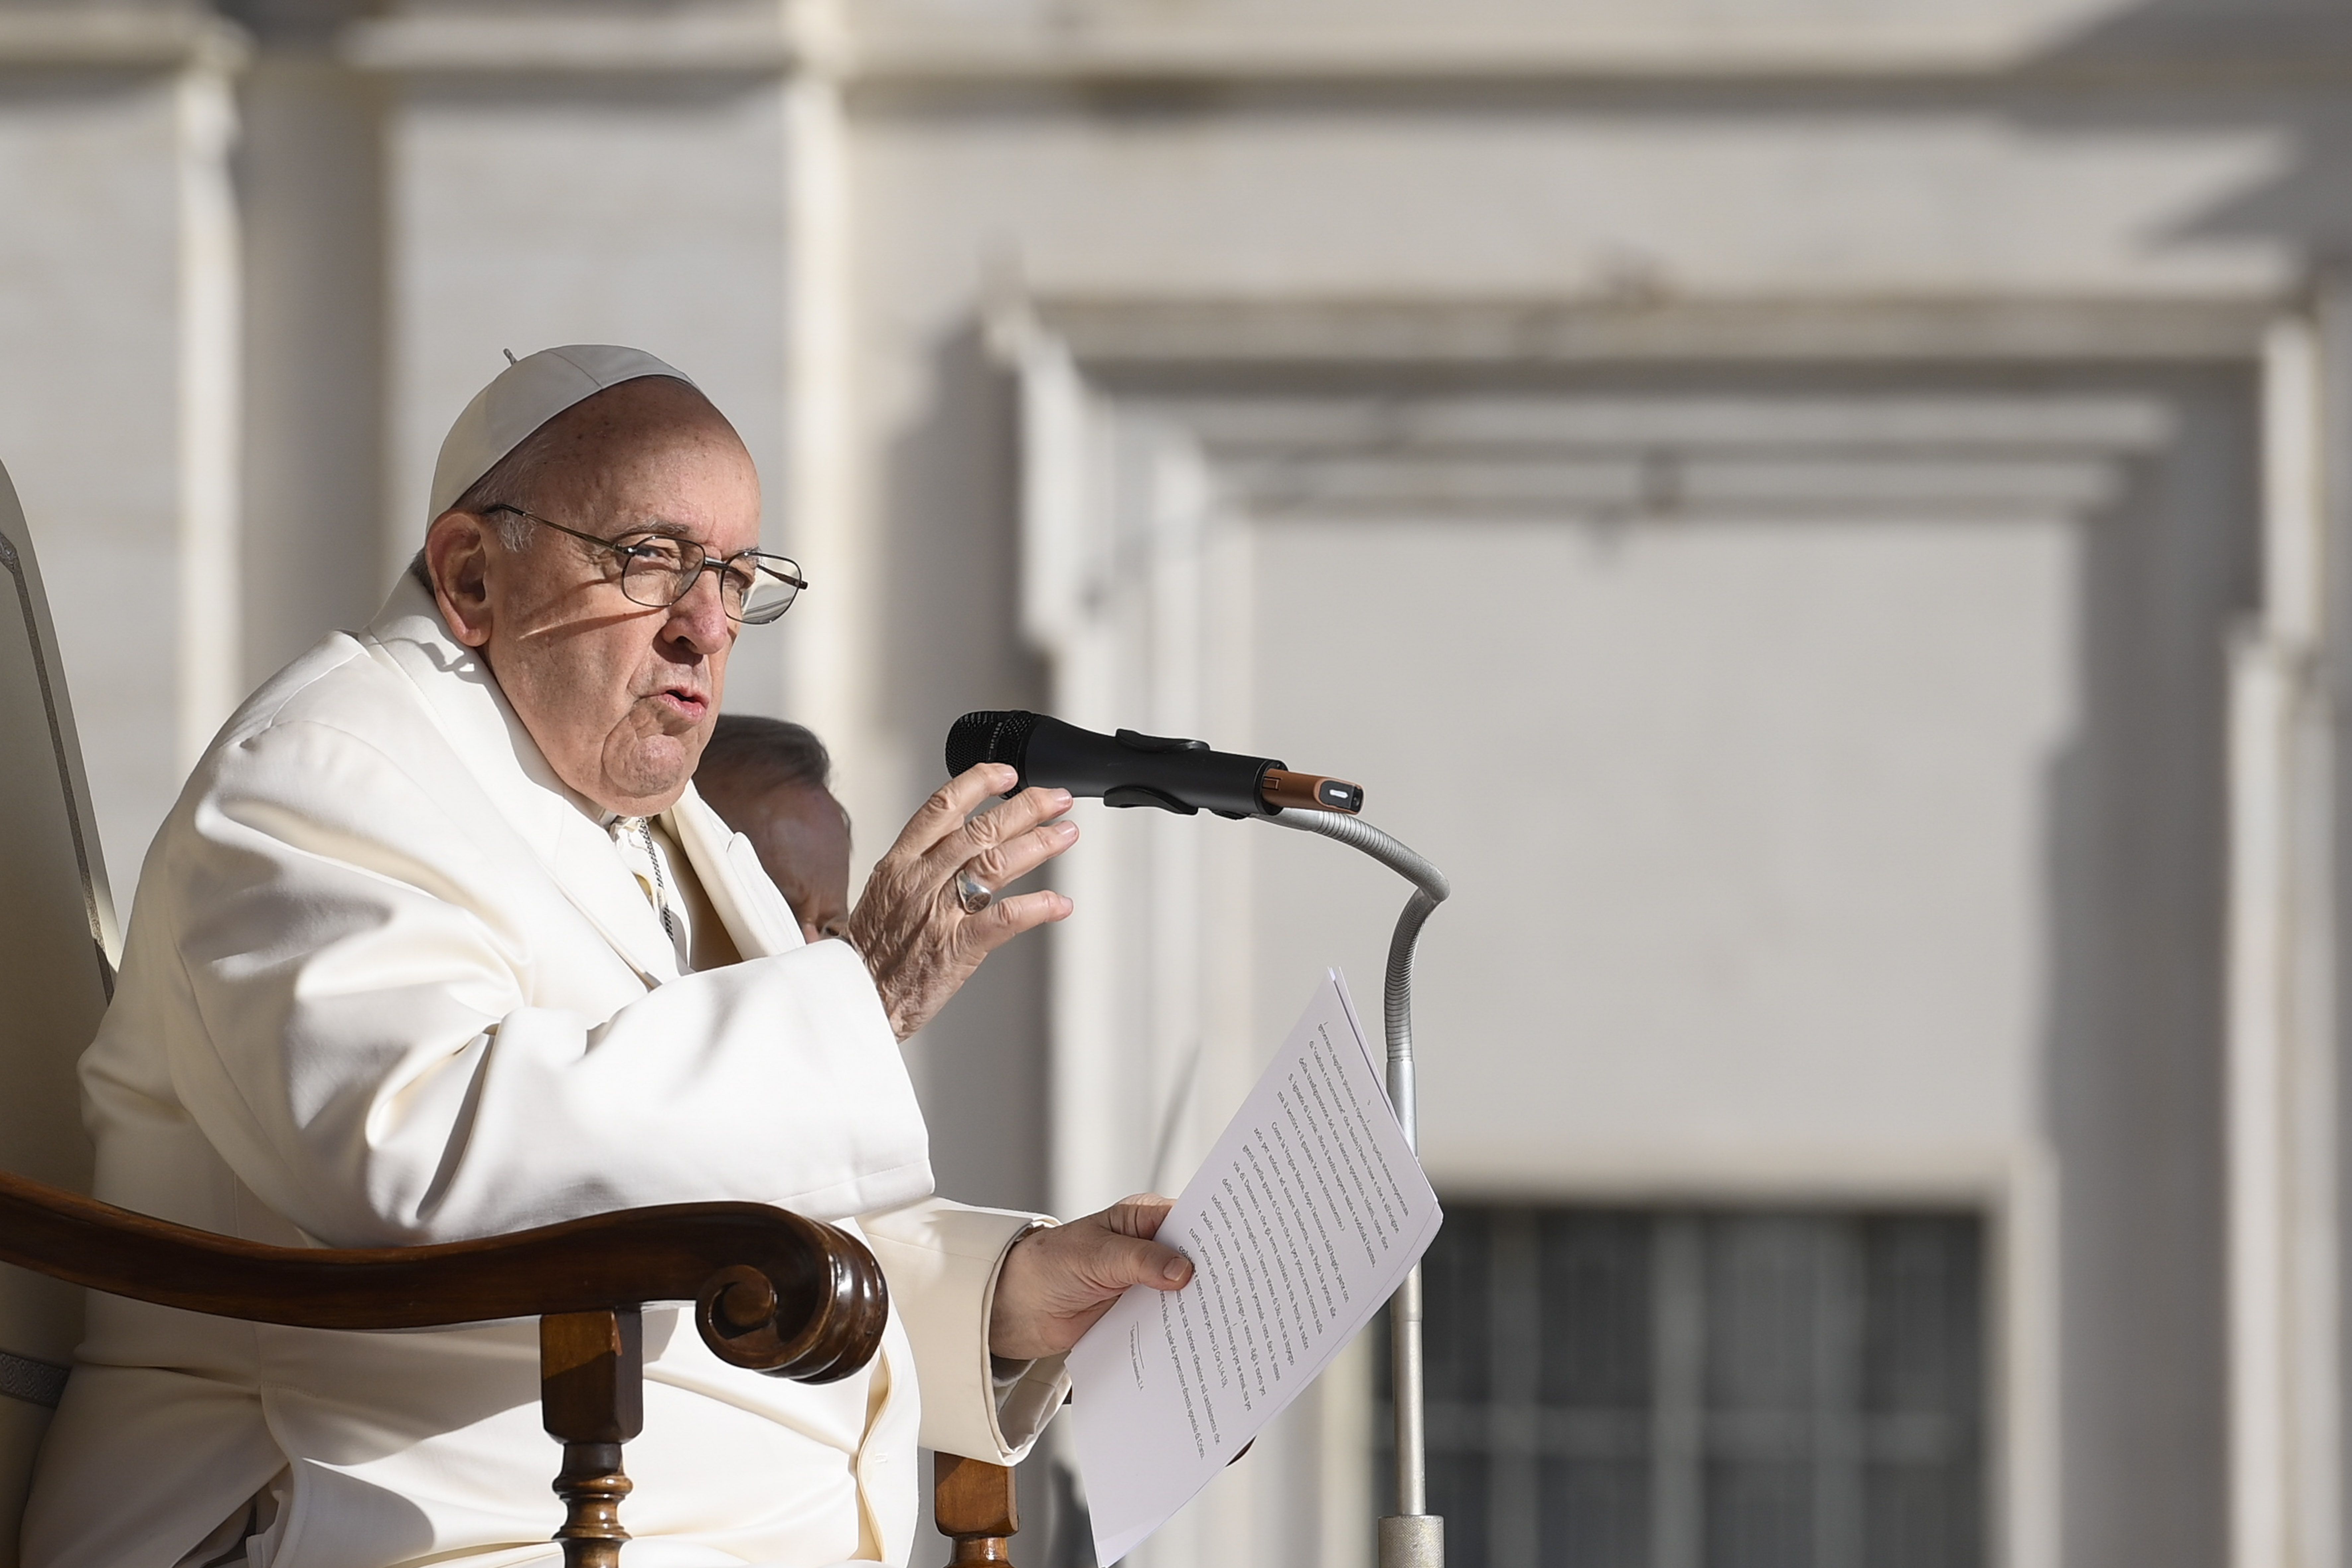 UPDATE: Pope Francis has bronchitis but is resting and improving, Vatican says